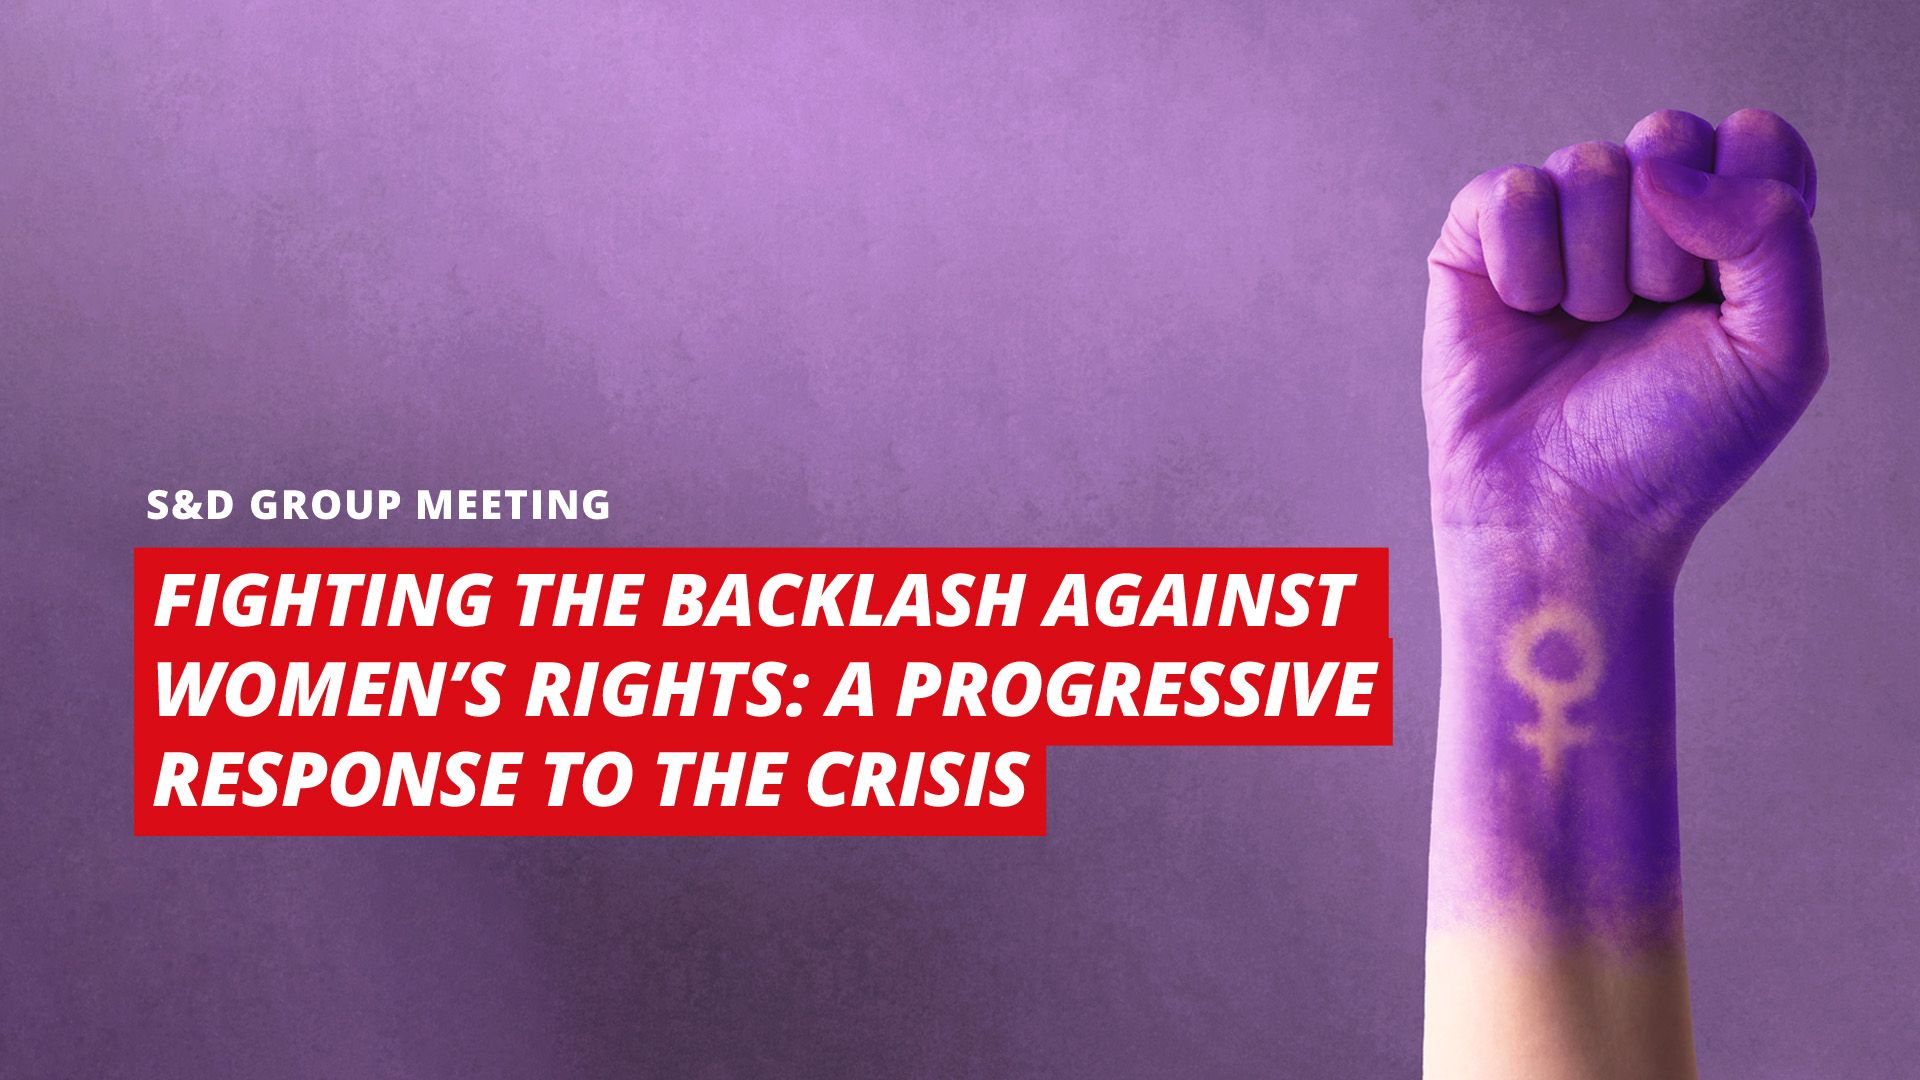 Fighting the backlash against women's rights A progressive response to